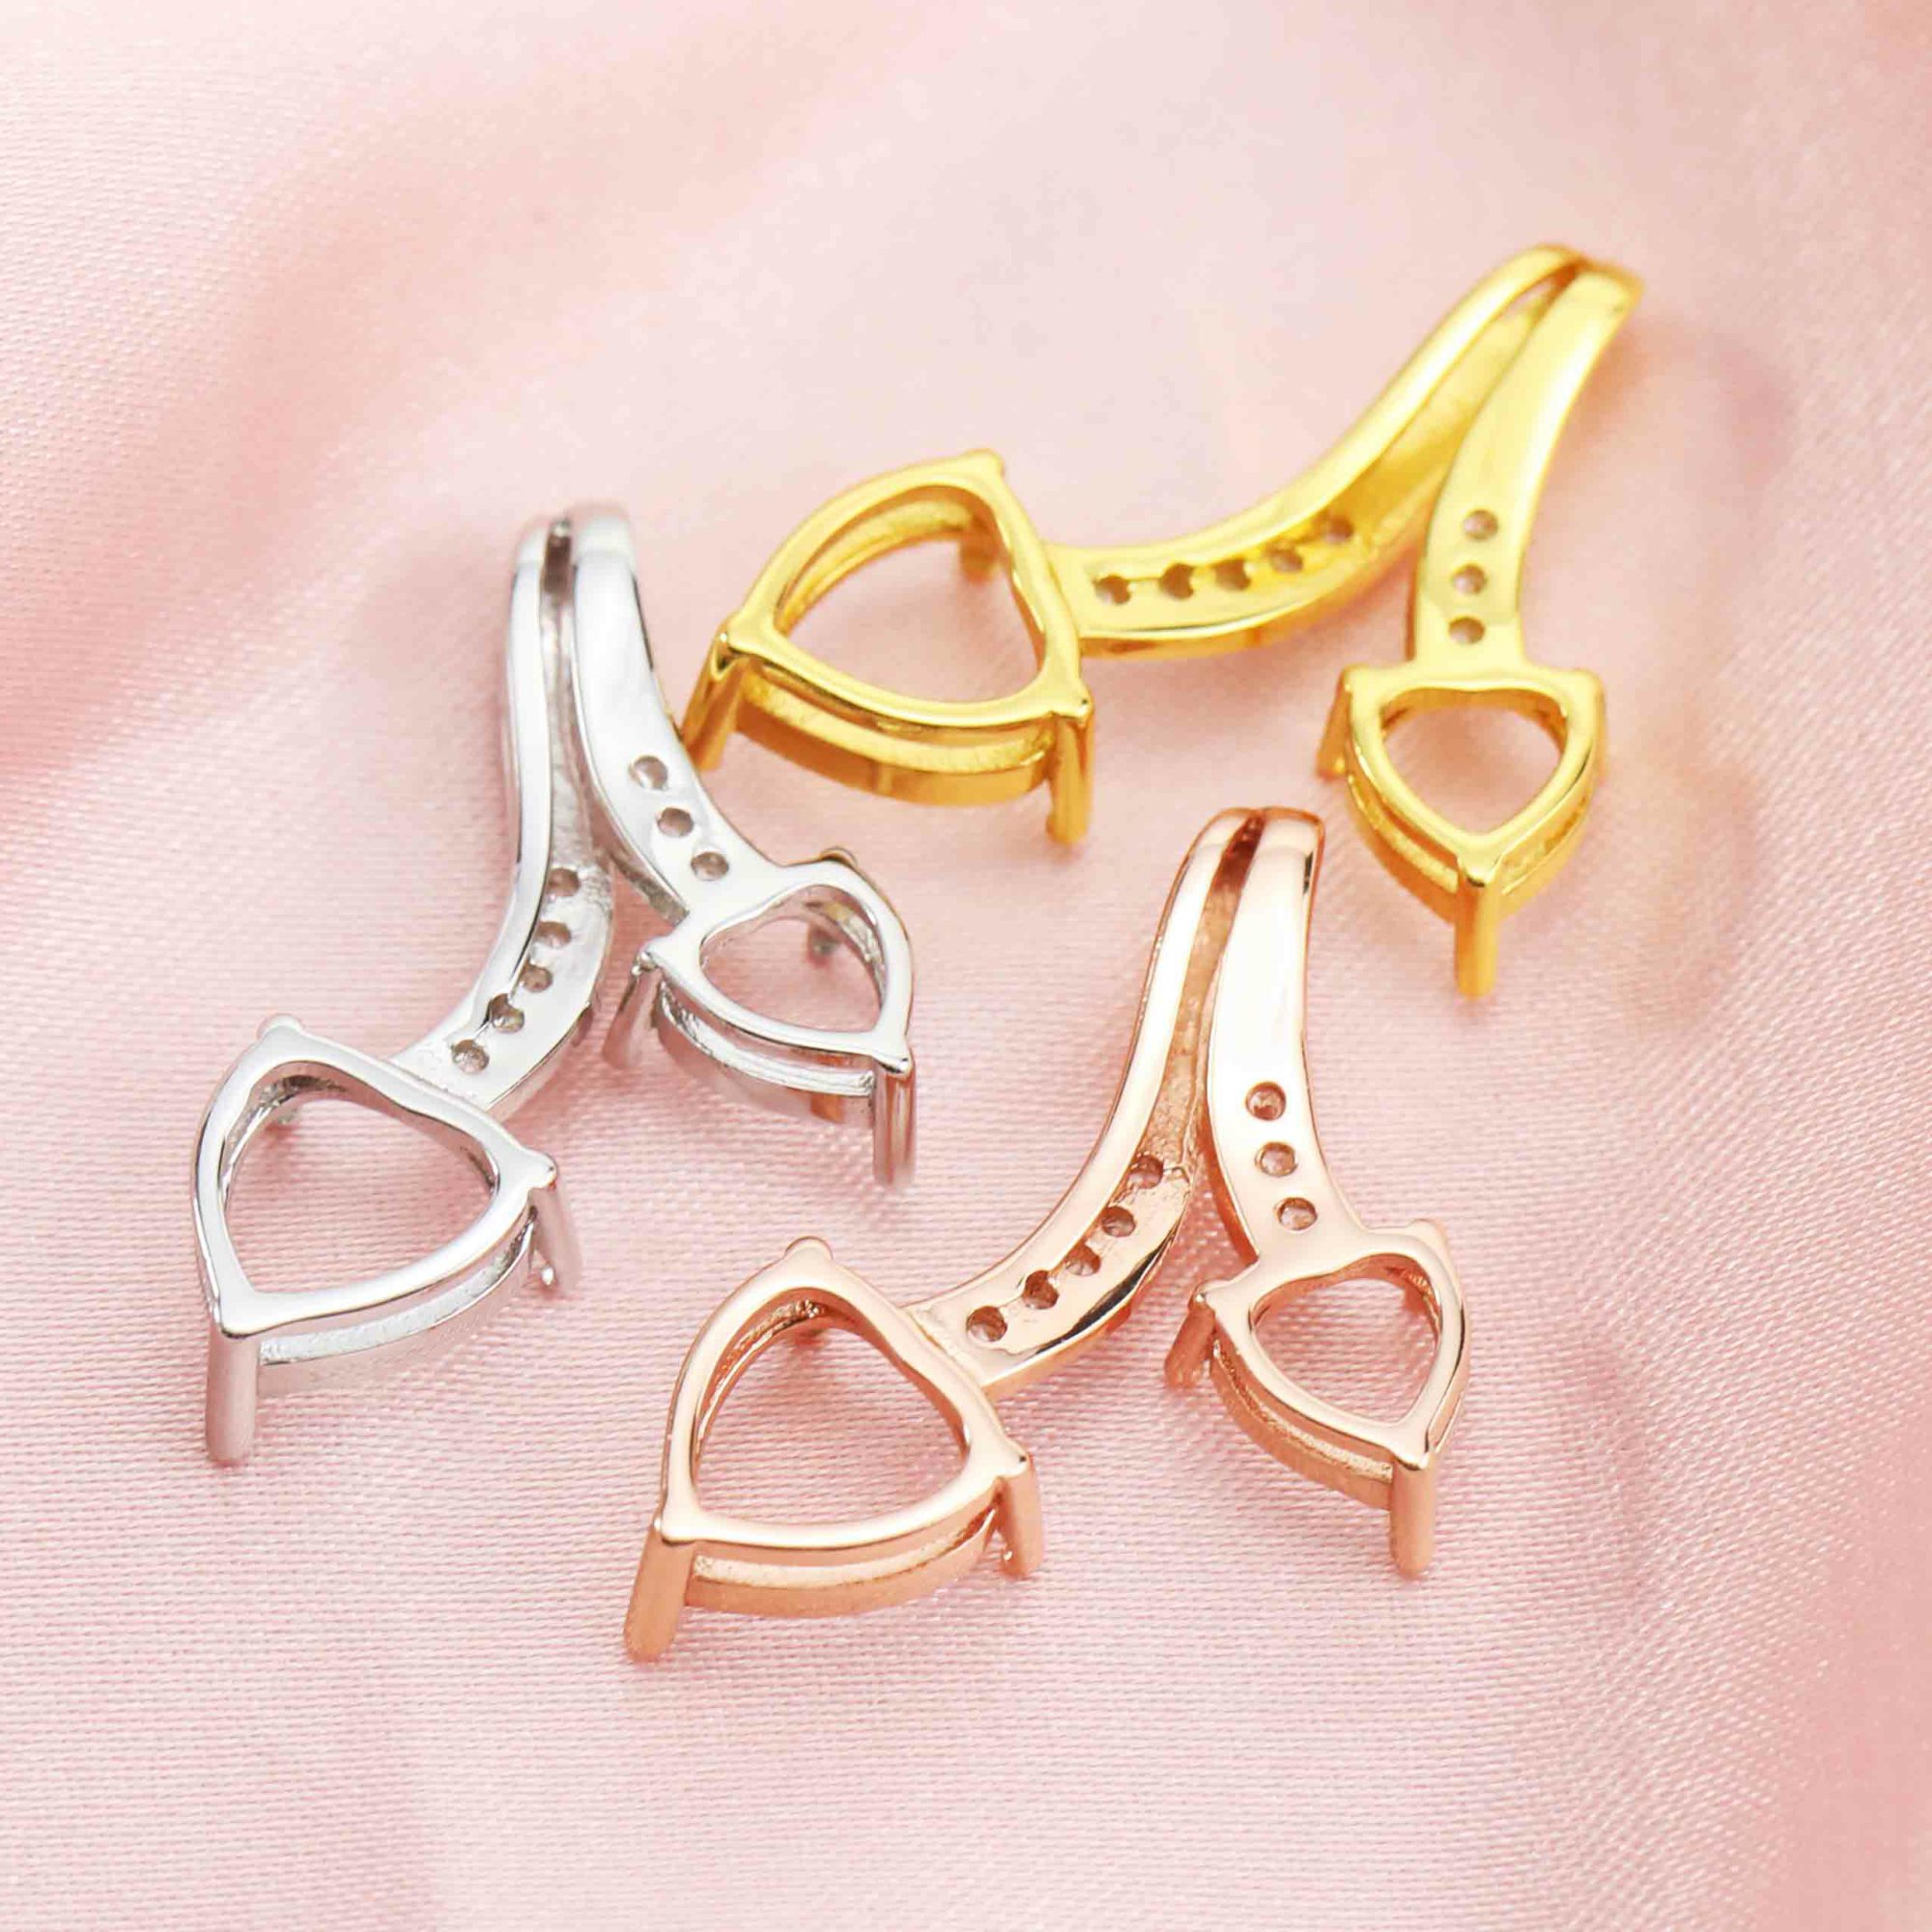 6/8MM Heart Prong Pendant Settings Solid 14K/18K Gold Bezel Two Stones Charm for DIY Gemstone Memory Jewelry Supplies 1431129-1 - Click Image to Close